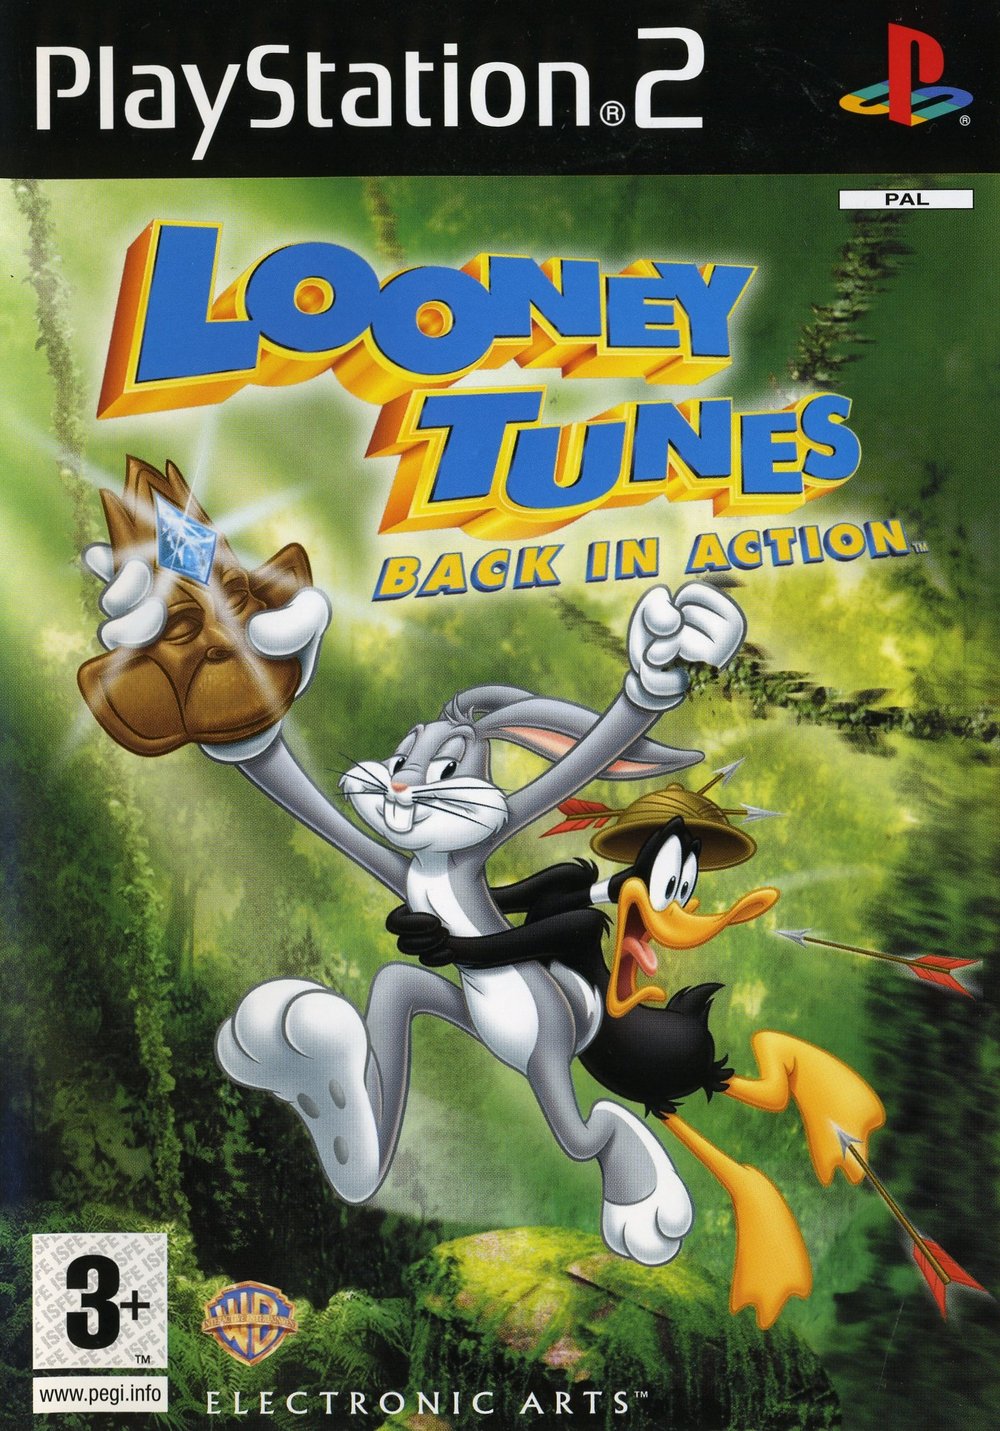 Looney tunes - back in action (pal) - front.